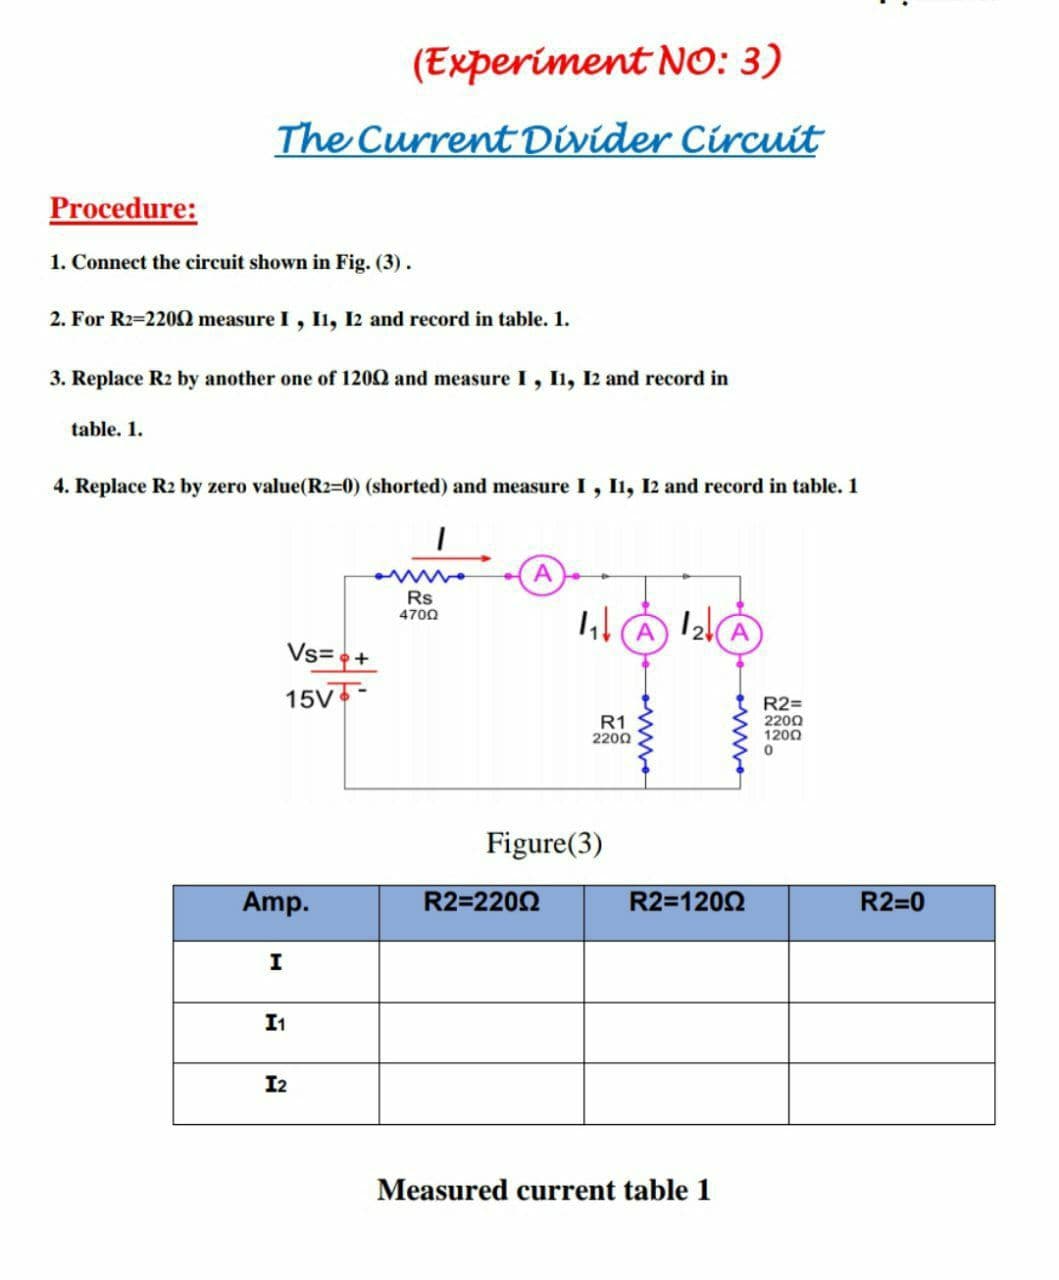 (Experiment NO: 3)
The Current Divider Circuit
Procedure:
1. Connect the circuit shown in Fig. (3).
2. For R2=2200 measure I, Iı, I2 and record in table. 1.
3. Replace R2 by another one of 120Q and measure I, Ii, I2 and record in
table. 1.
4. Replace R2 by zero value(R2=0) (shorted) and measure I, I1, I2 and record in table. 1
A.
Rs
4700
A
Vs=+
15V
R1
2200
R2=
2200
1200
Figure(3)
Amp.
R2=2202
R2=1202
R2=0
I1
I2
Measured current table 1
